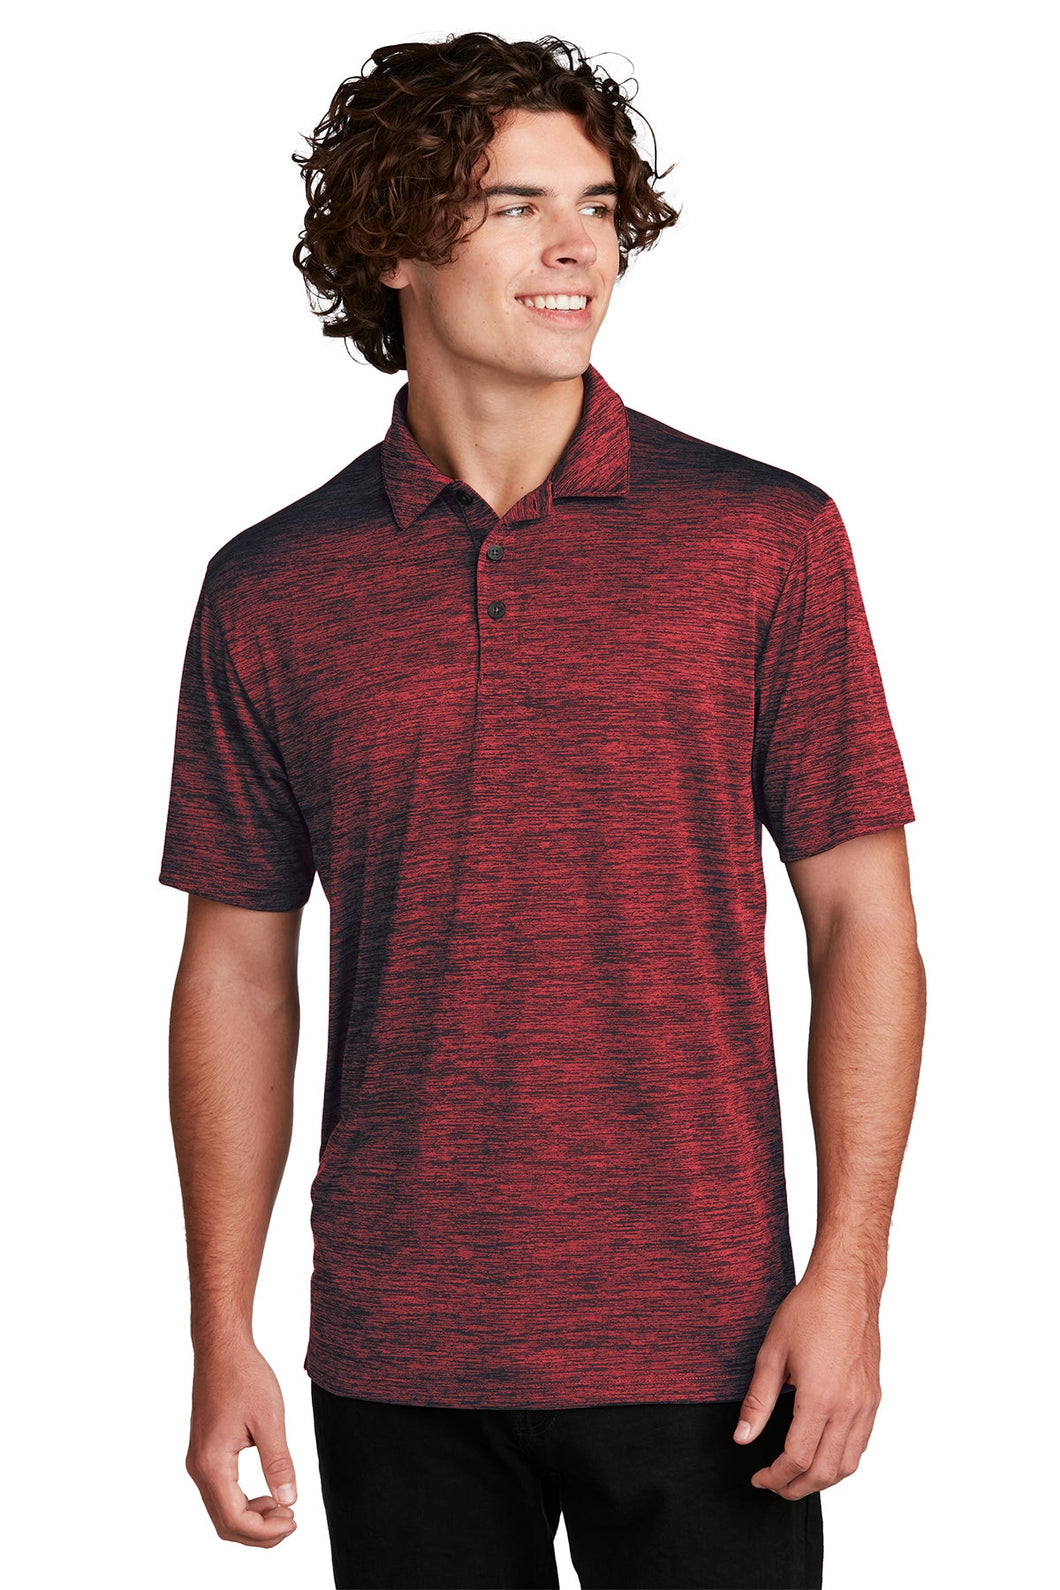 Laser Performance Polo